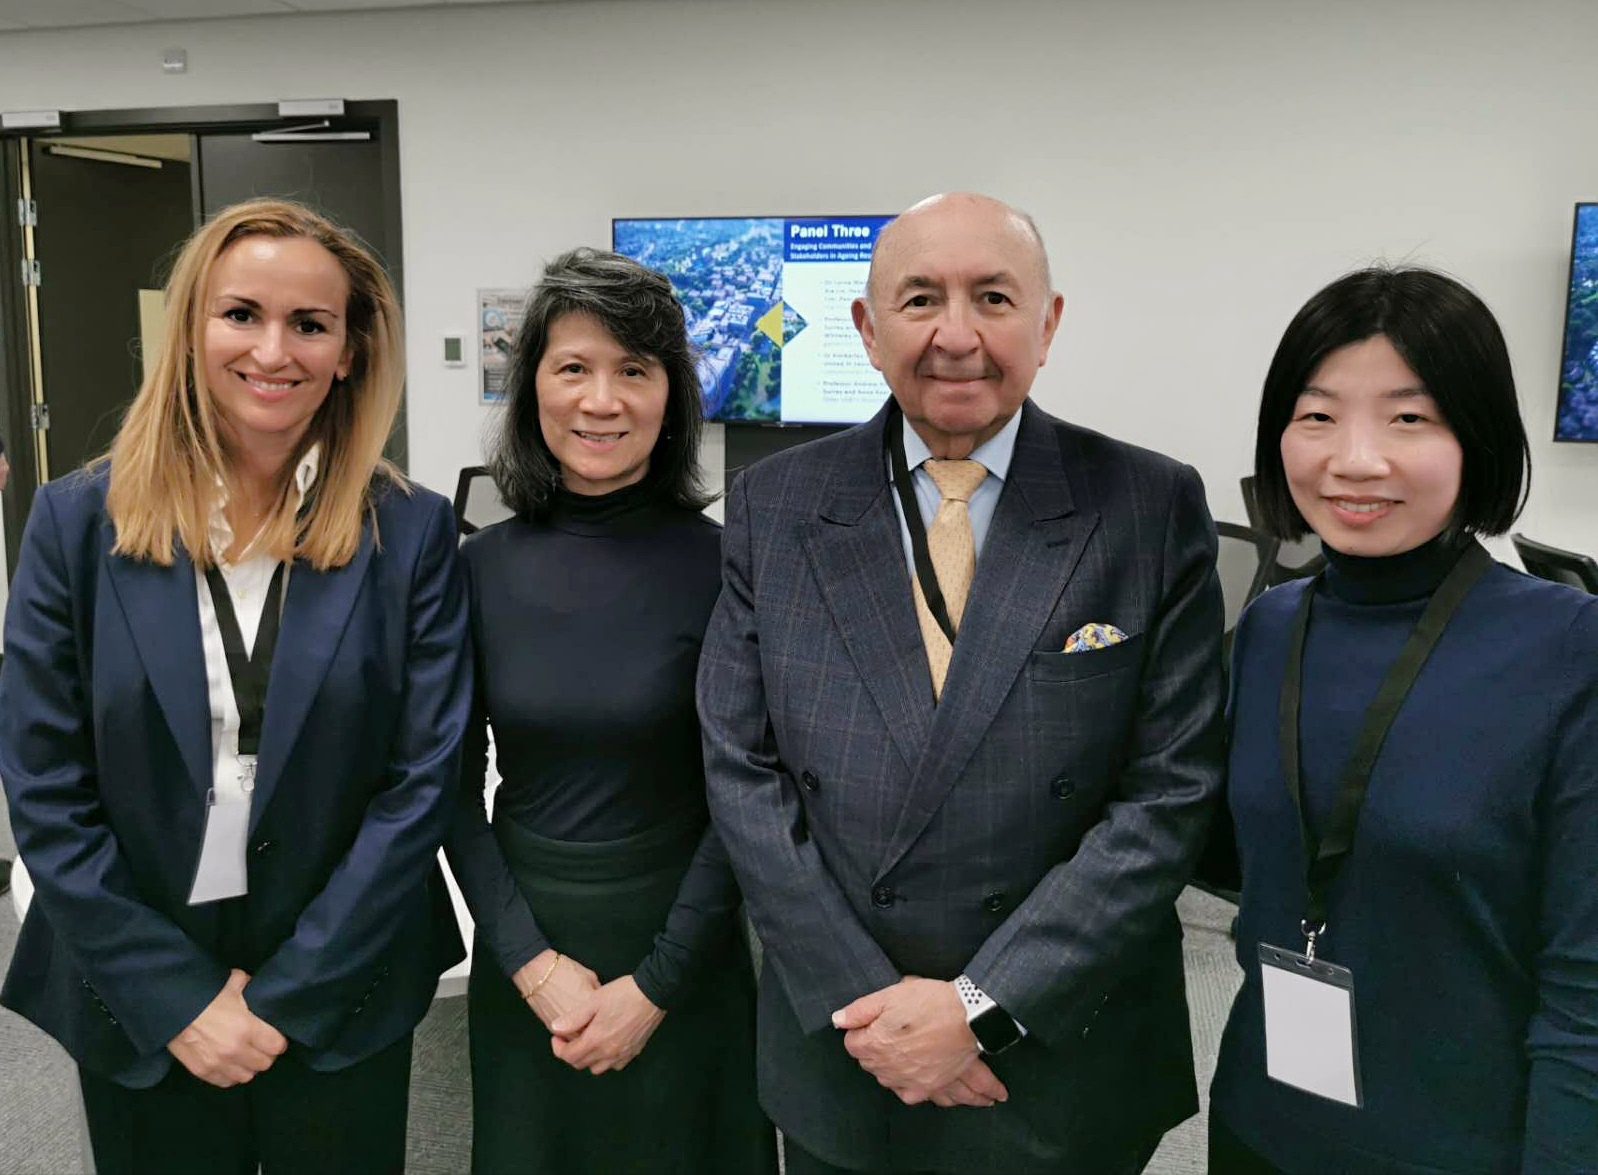 Bee and Dr Xia Lin photographed with Luis Gallegos, President of United Nations Institute for Training and Research (UNITAR) and Silvia Candamil Neira, vice president of the United Nations Global Initiative on Ageing